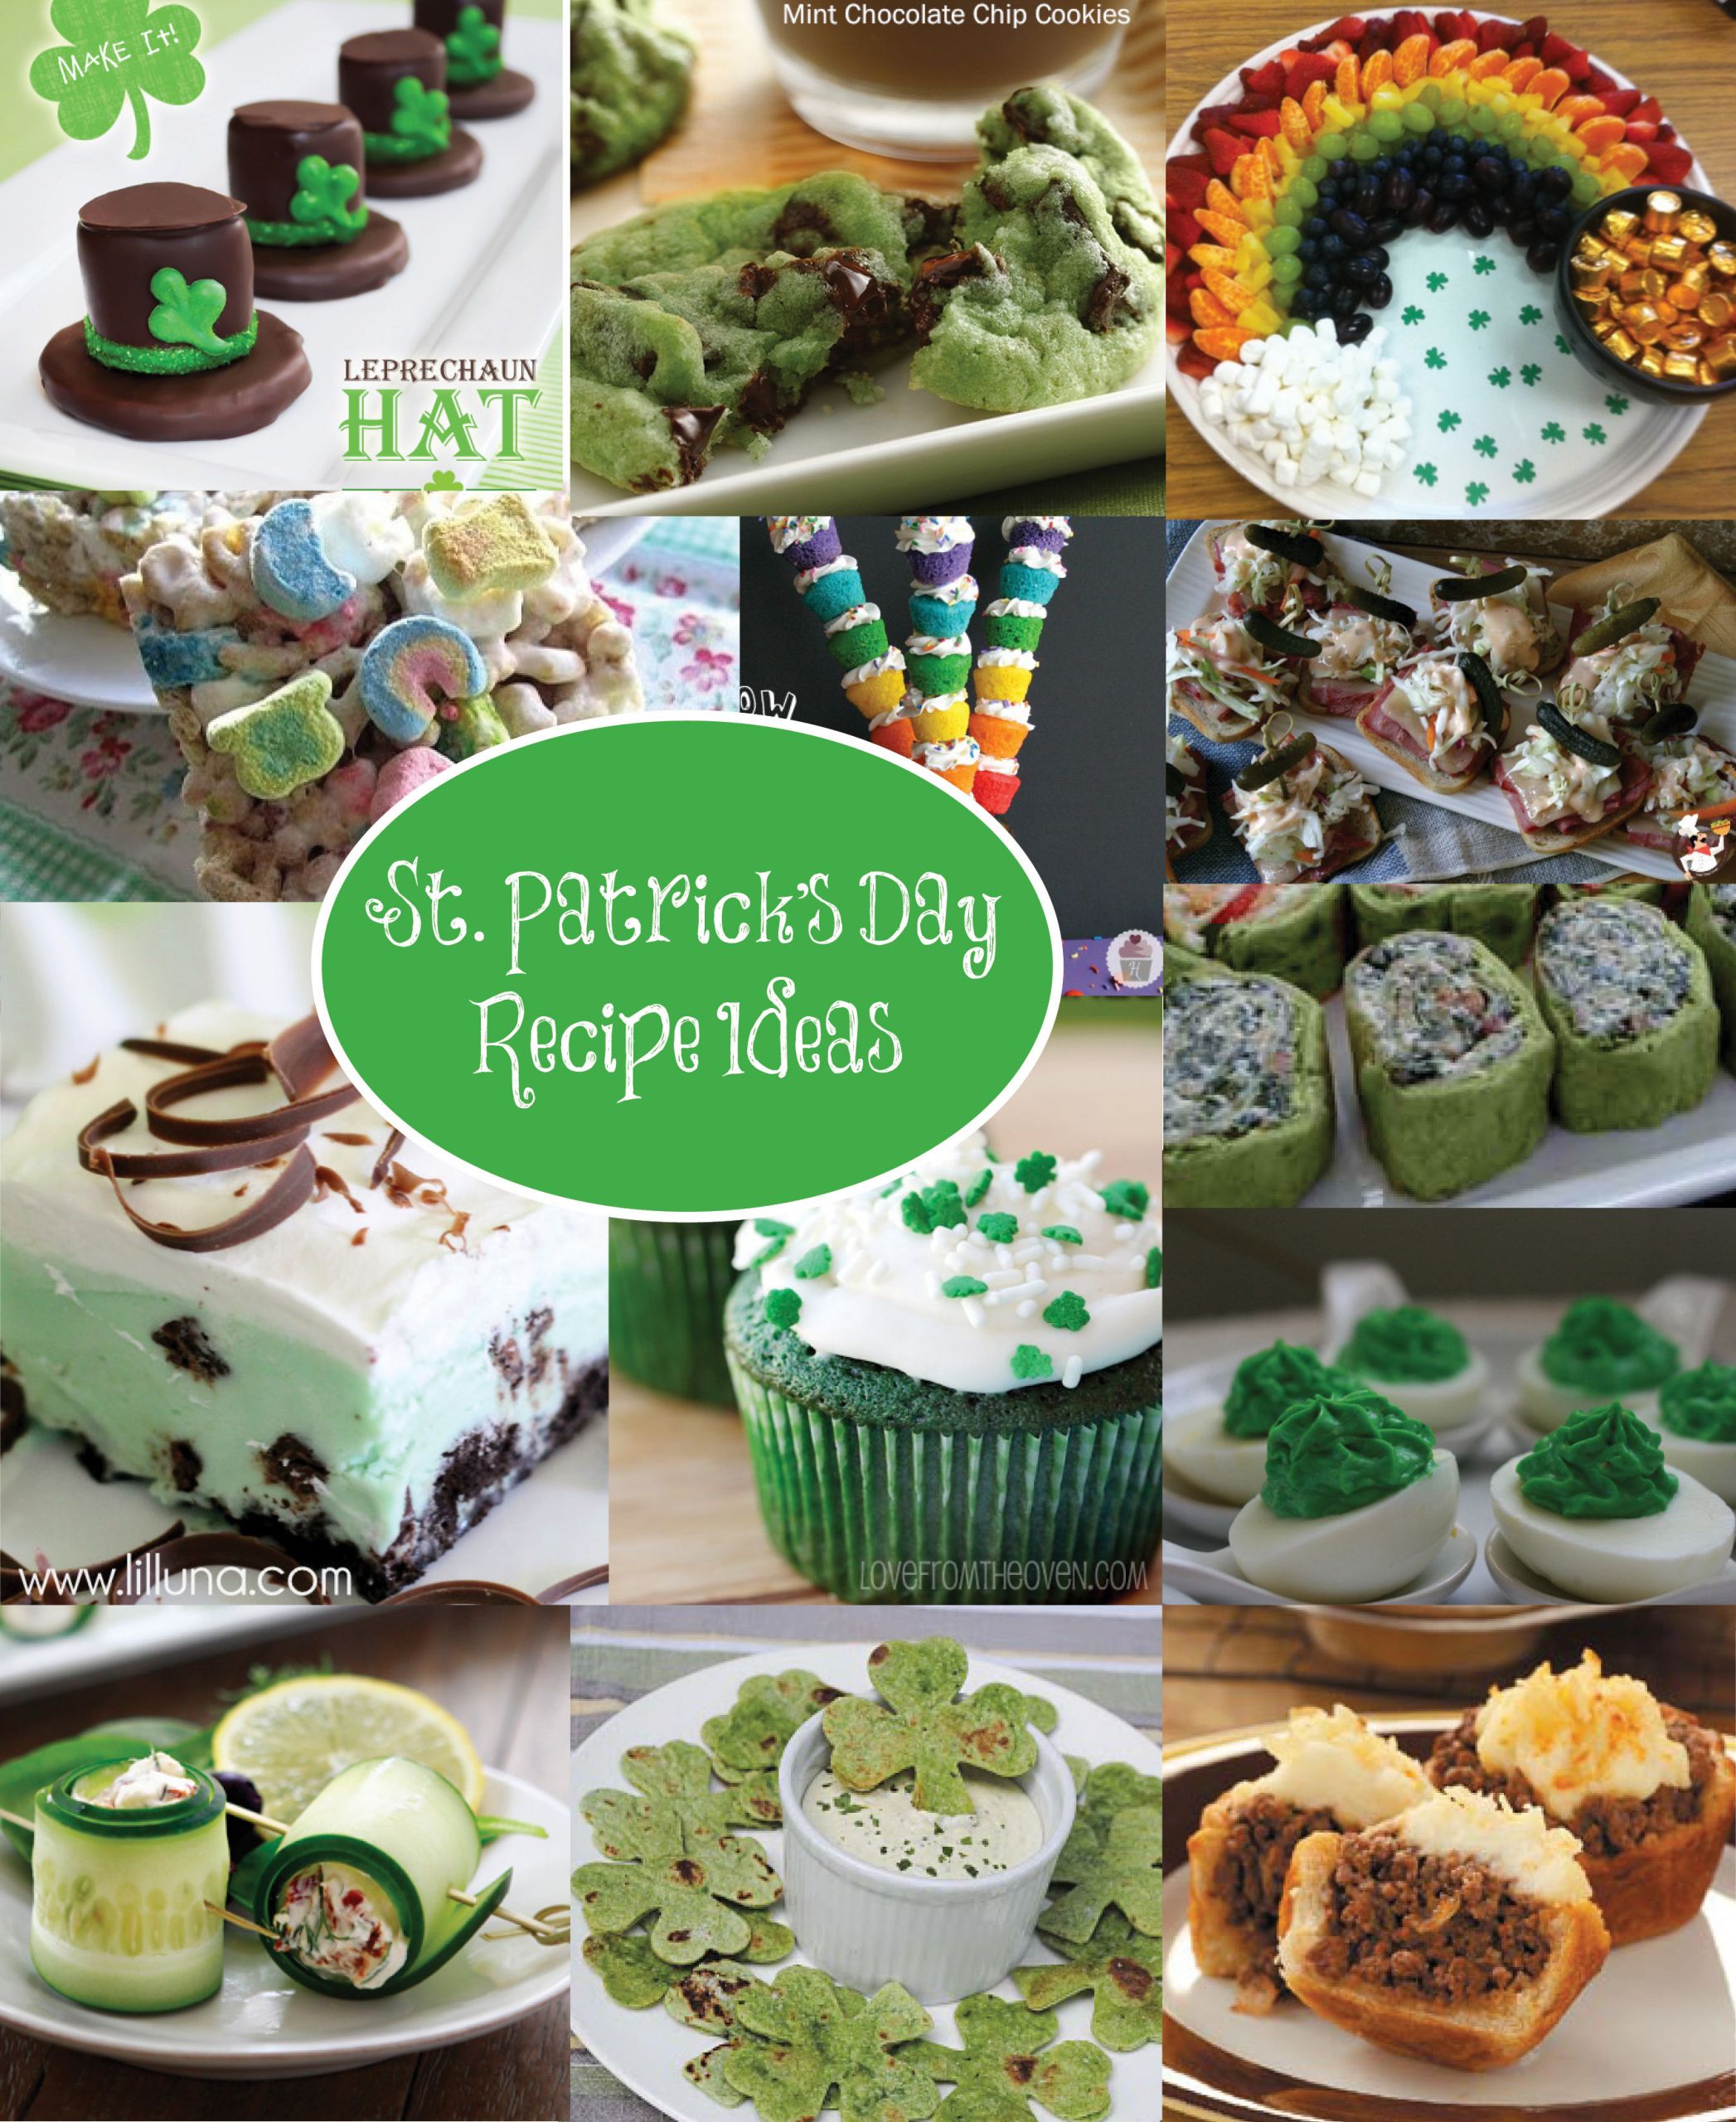 St Patrick's Day Meal Ideas
 6 ideas to bring Irish fun into the workplace for St